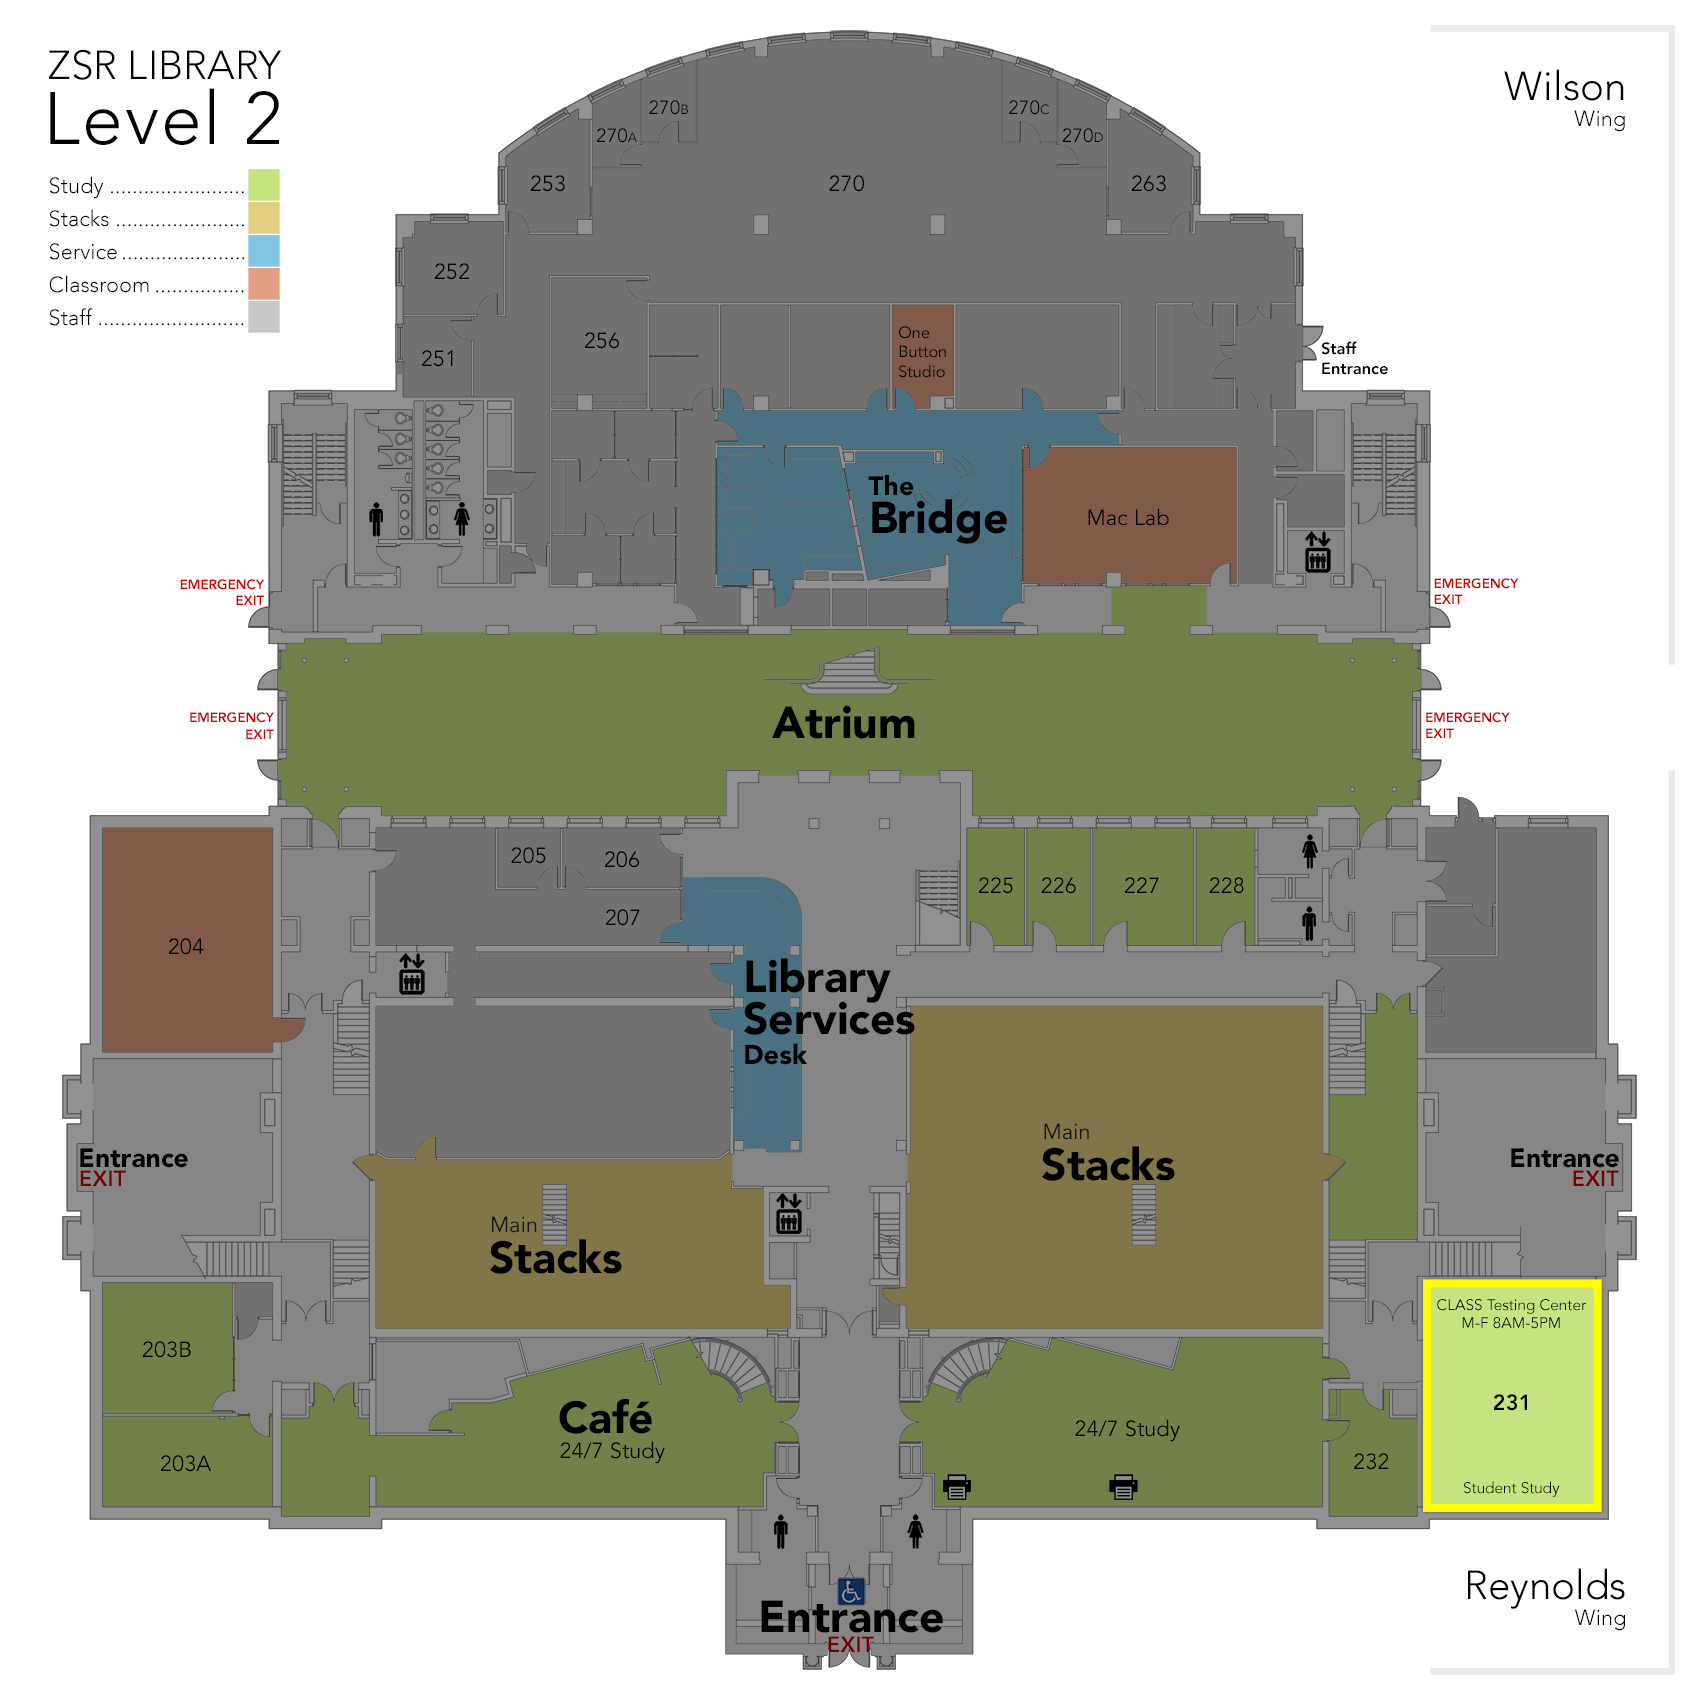 Level 2 Room 231 map